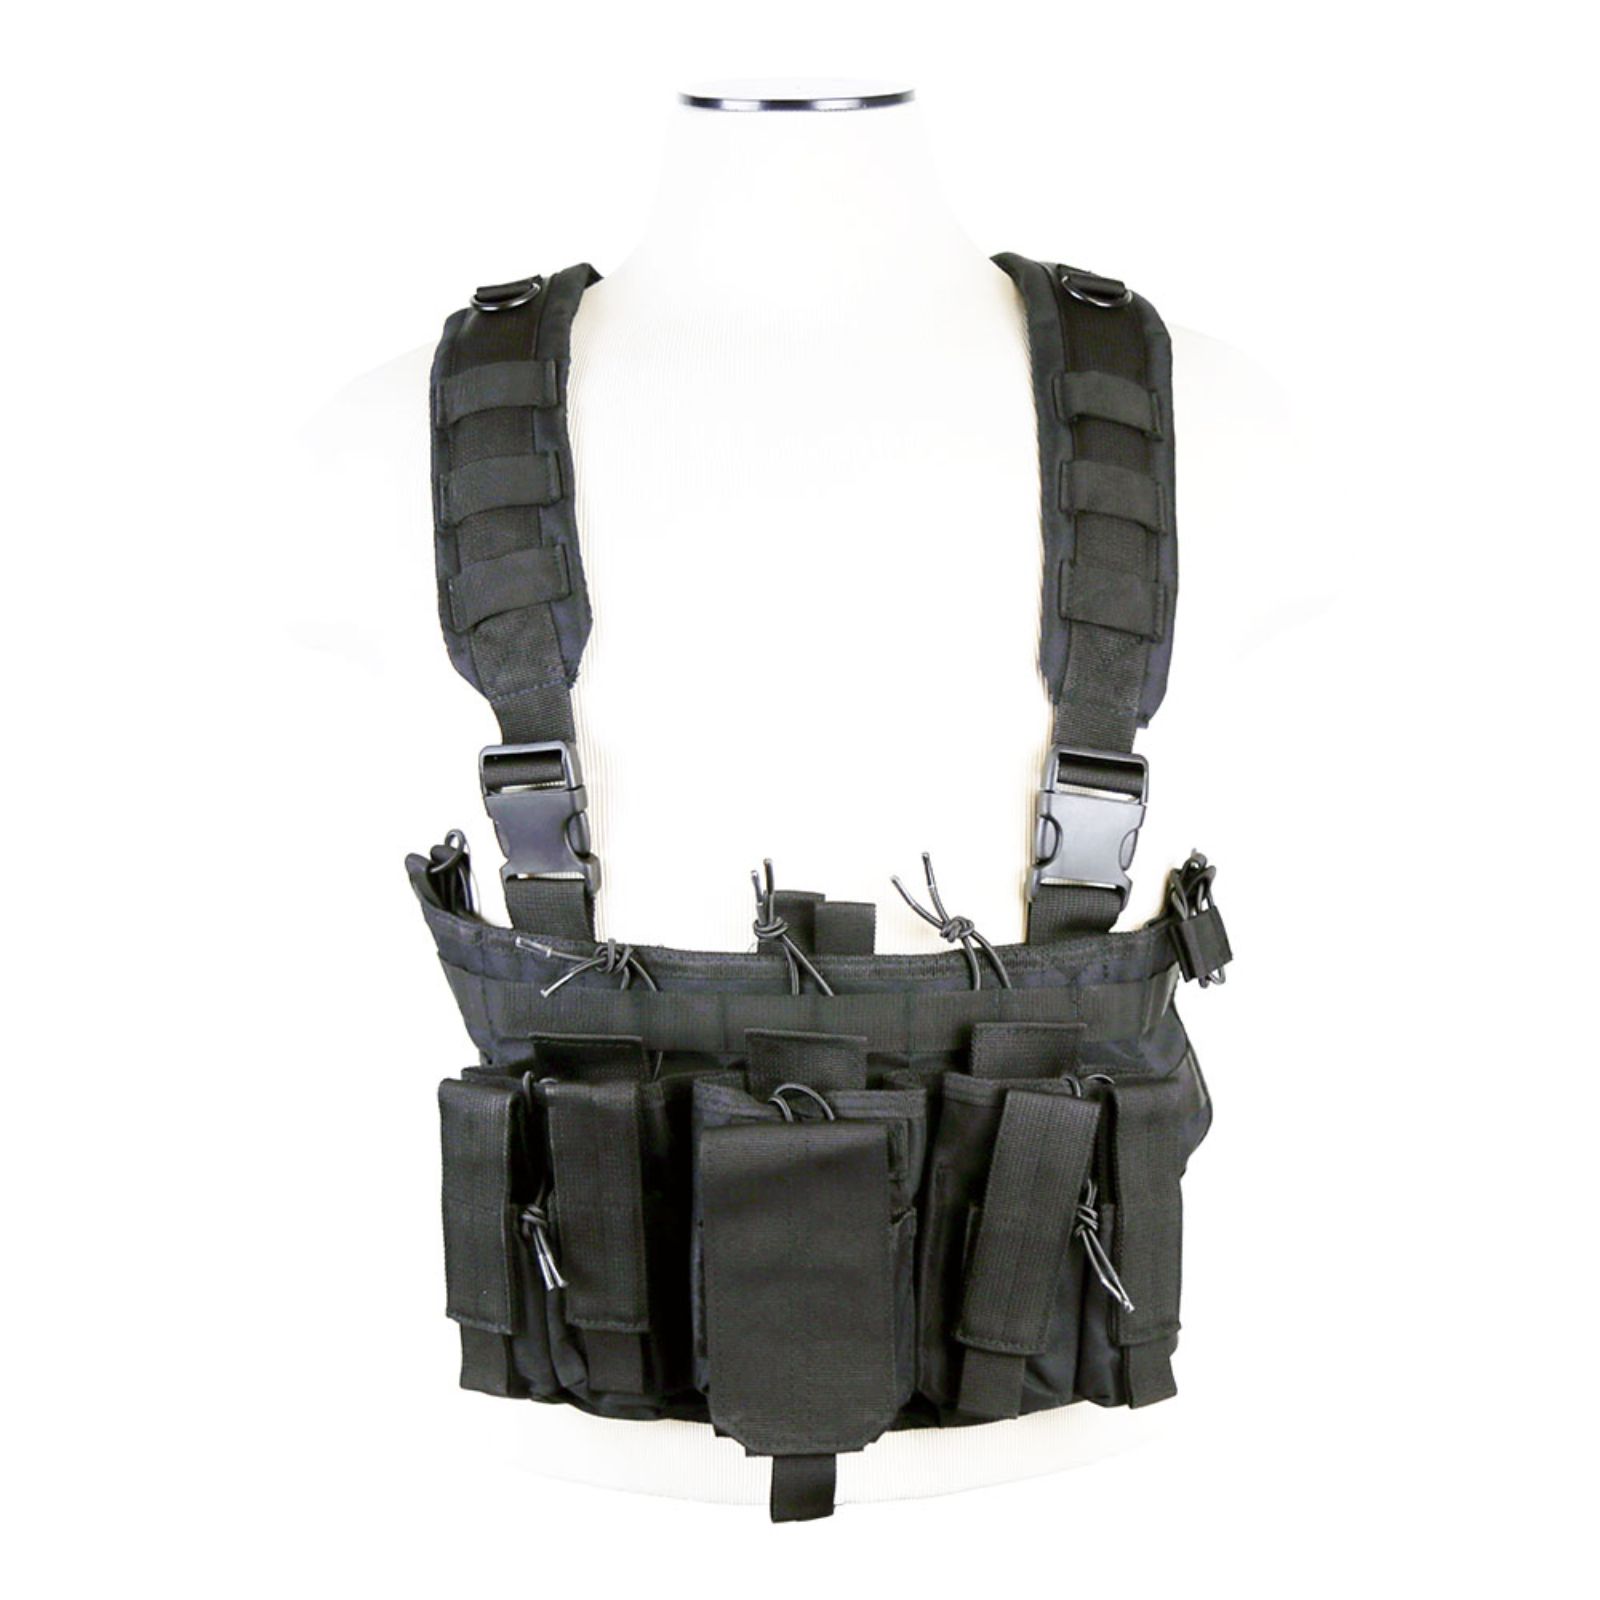 NcSTAR Vest AR and Pistol Chest Rig Black - BOLD Tactical